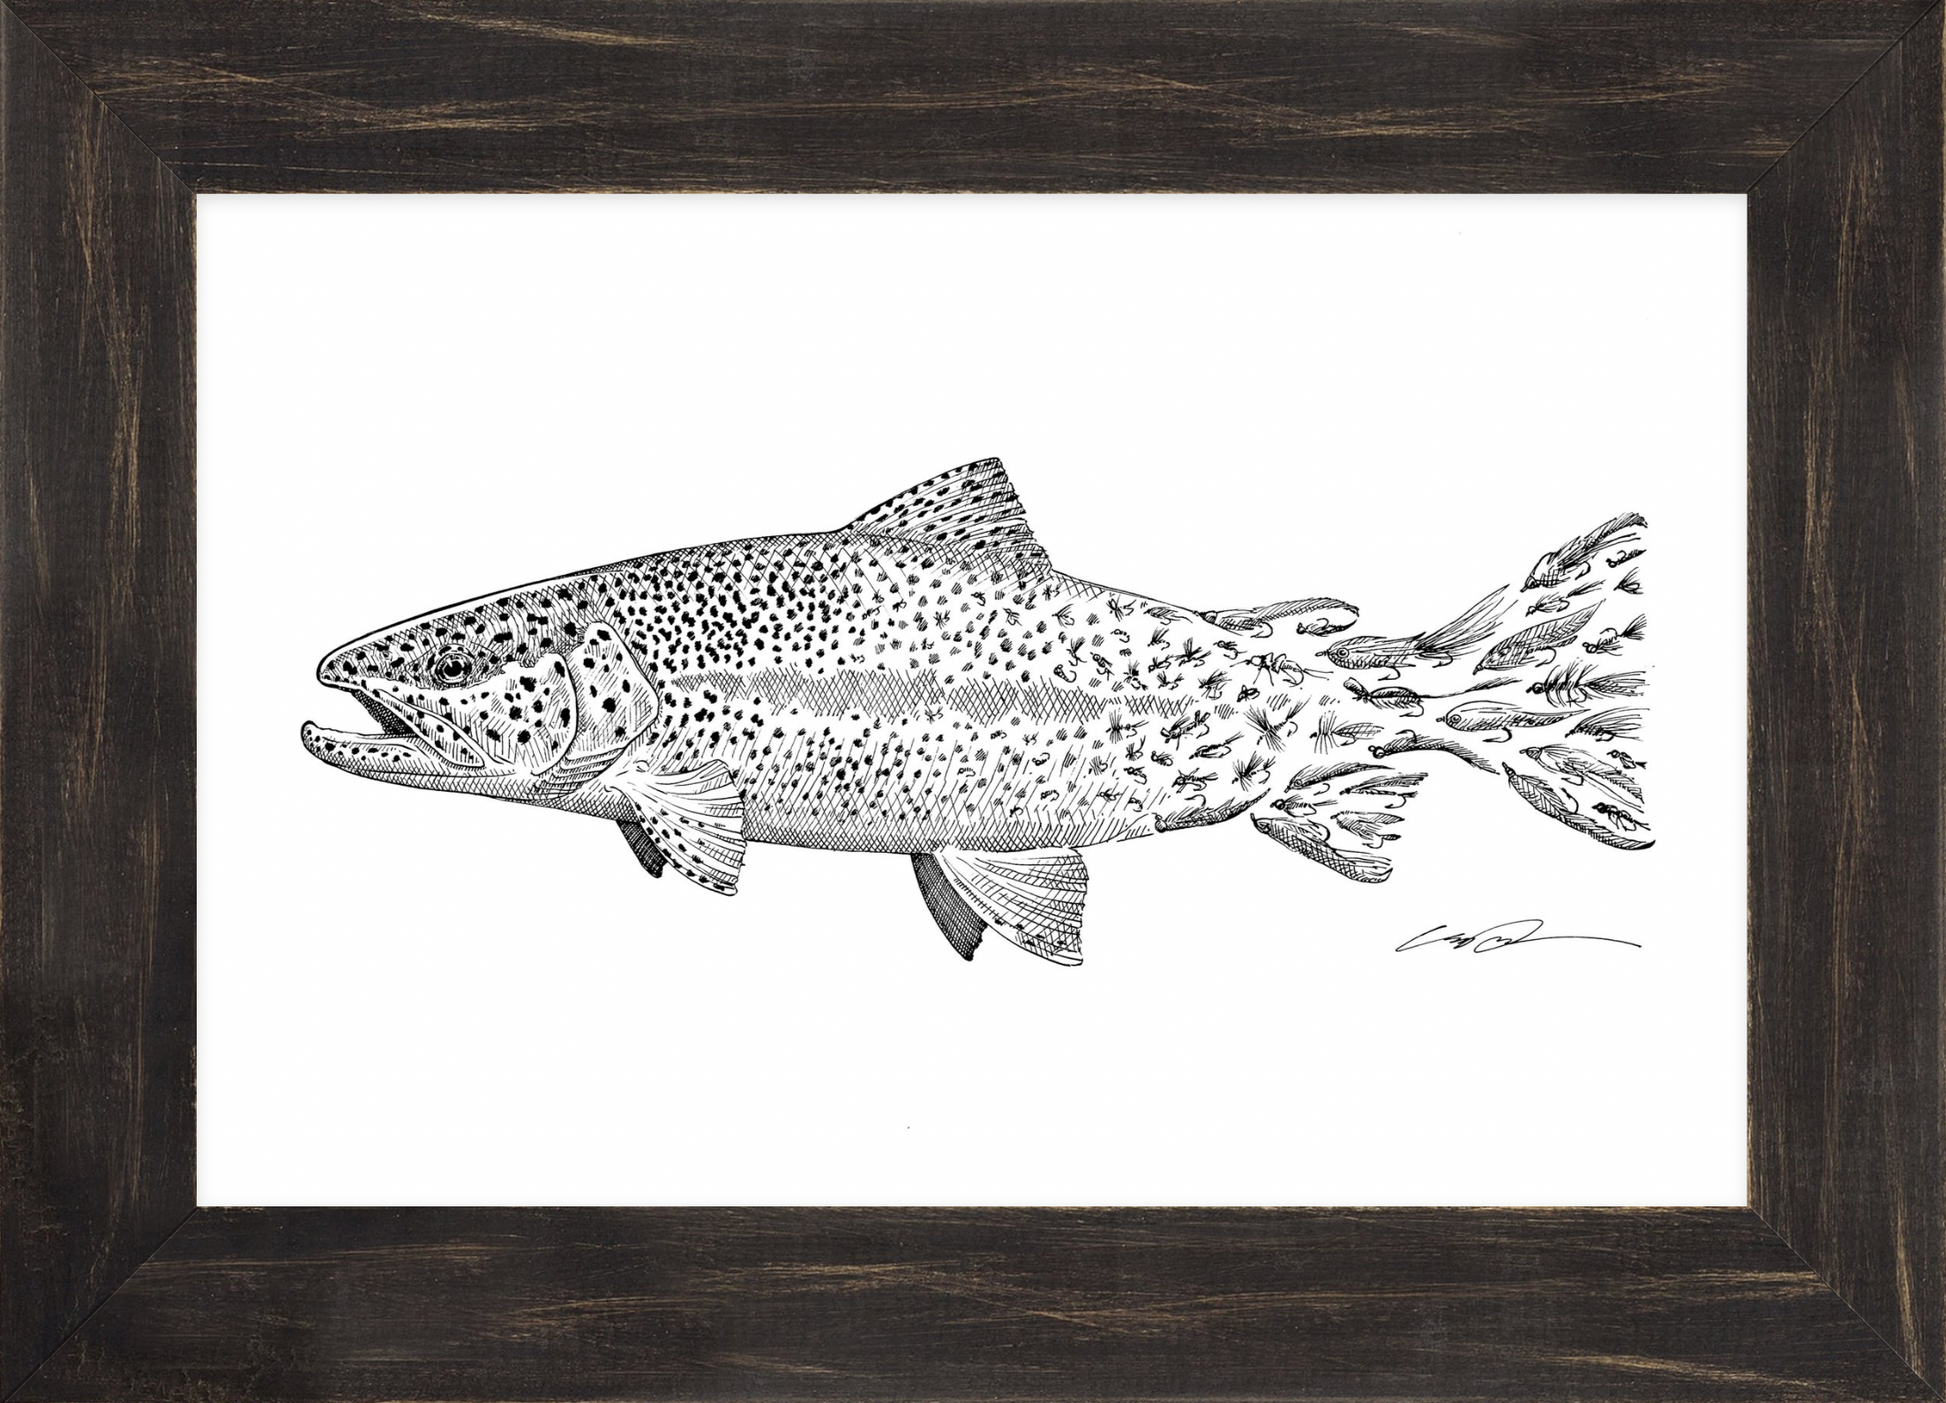 A pen and ink drawing of a rainbow trout where the trout's spots fade into flies to form the tail of the fish, framed in a dark wood frame